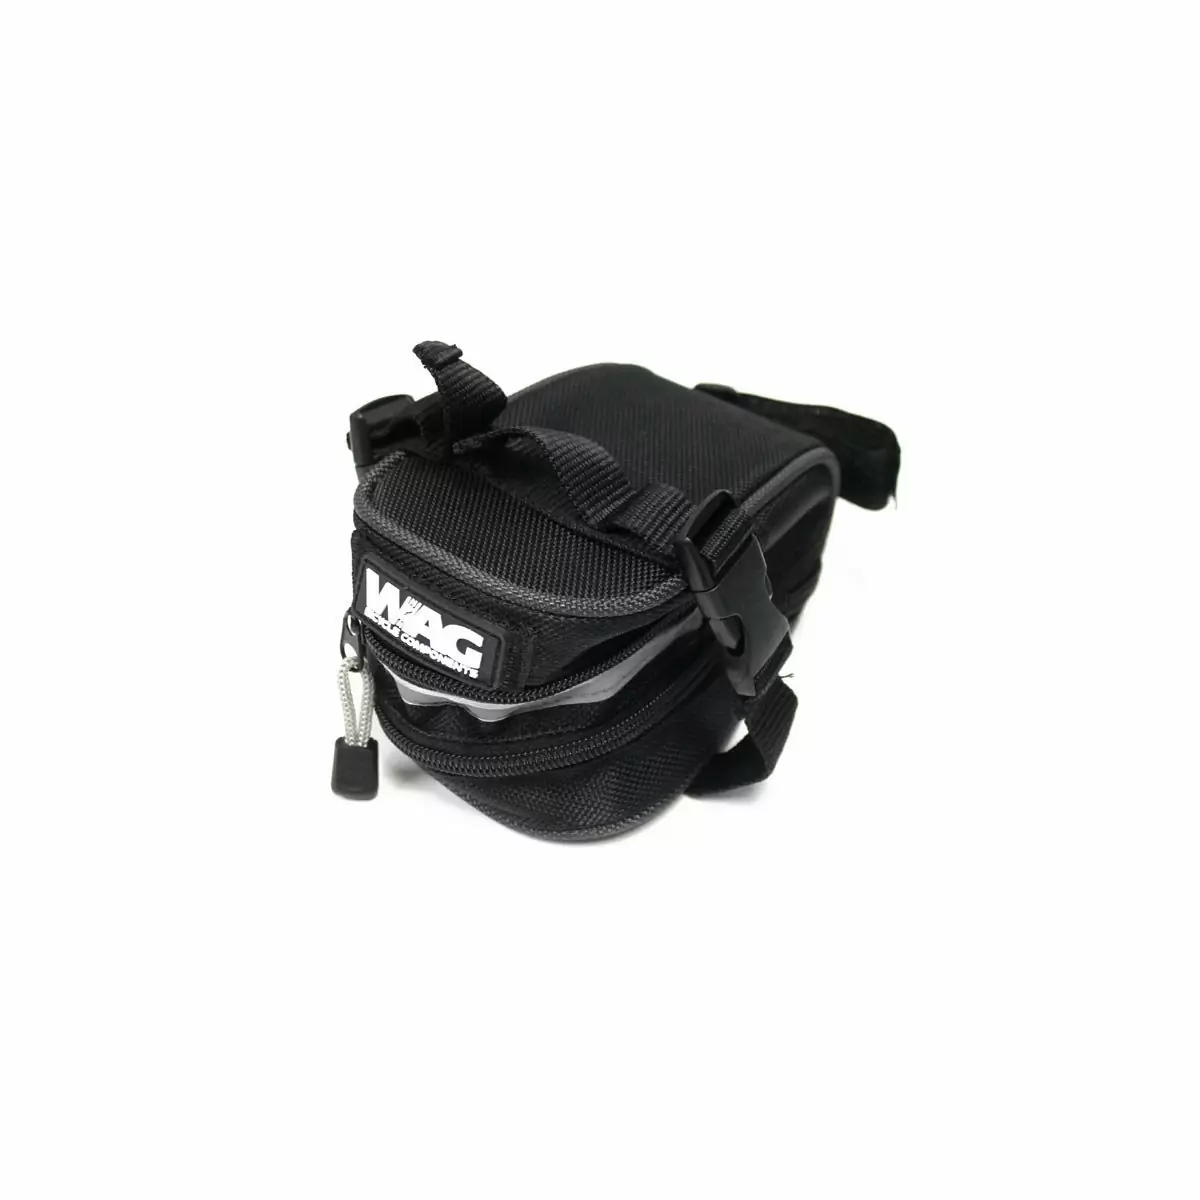 expandable mtb saddle bag with quick release and straps strap - image